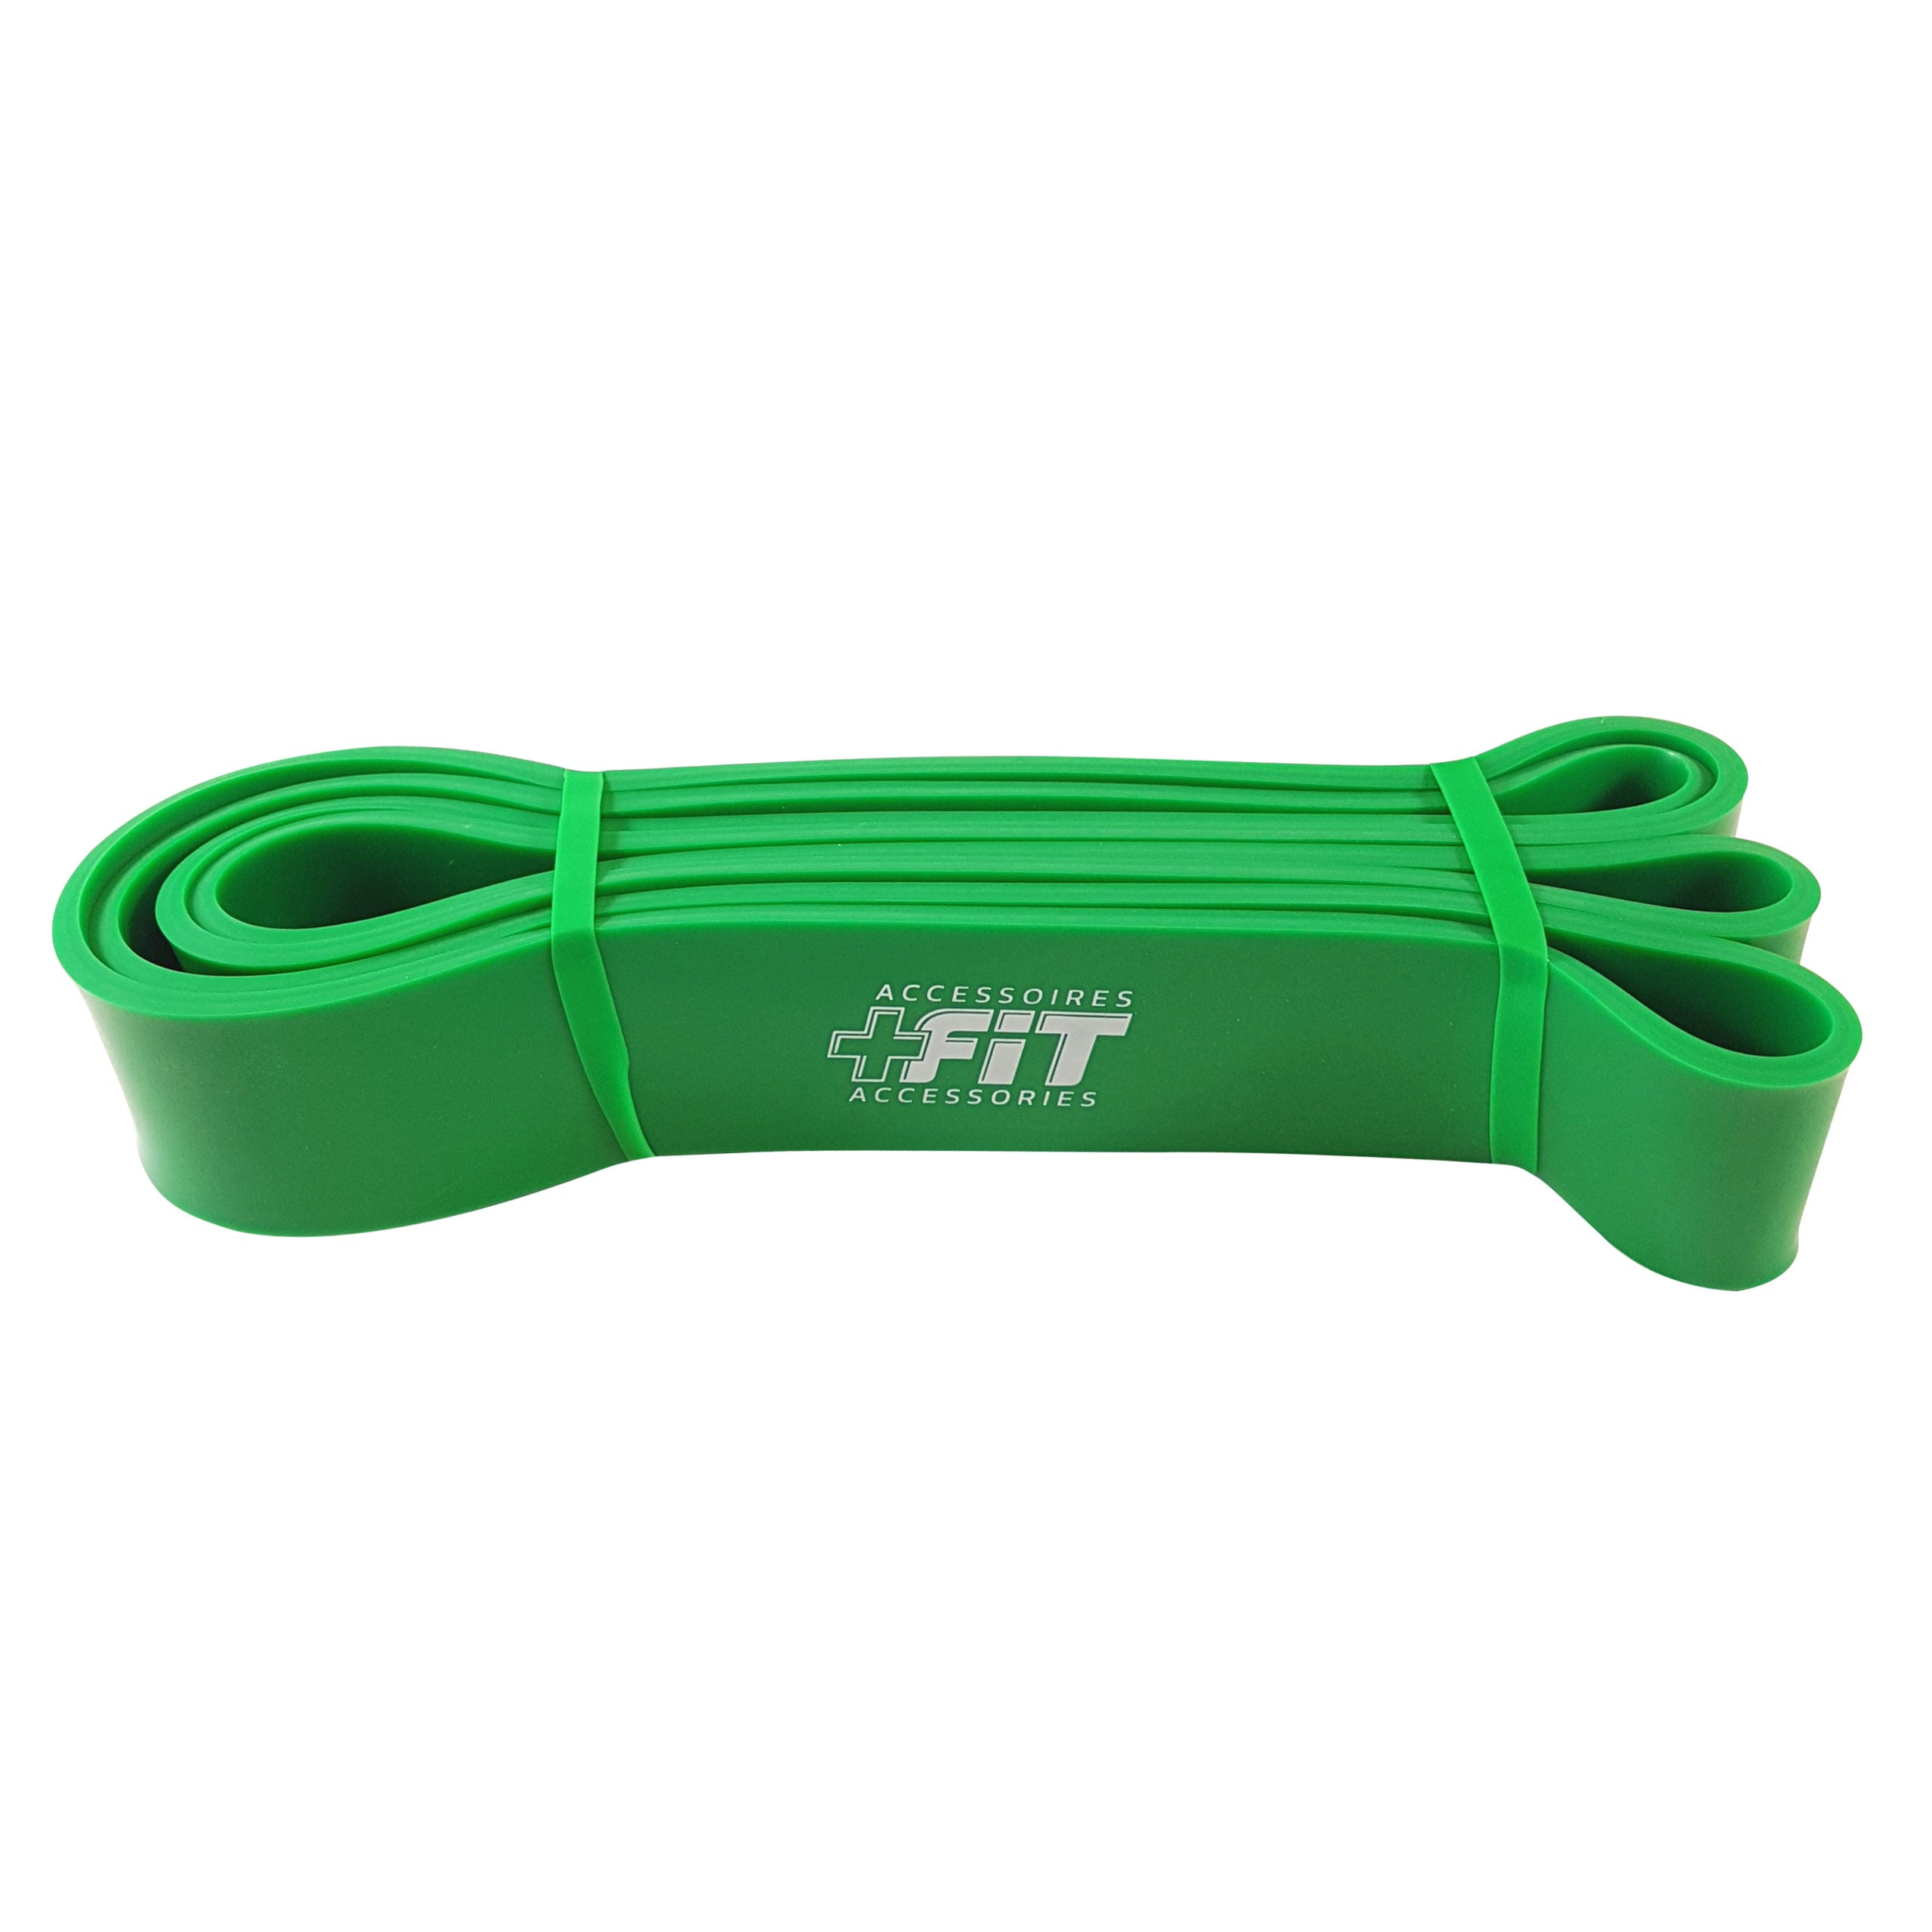 LONG LOOP RESISTANCE BANDS (1 Band) loop-resistance-bands-1-band Fitness Accessories Green 50-120lbs (1 3/4") Top Nutrition and Fitness